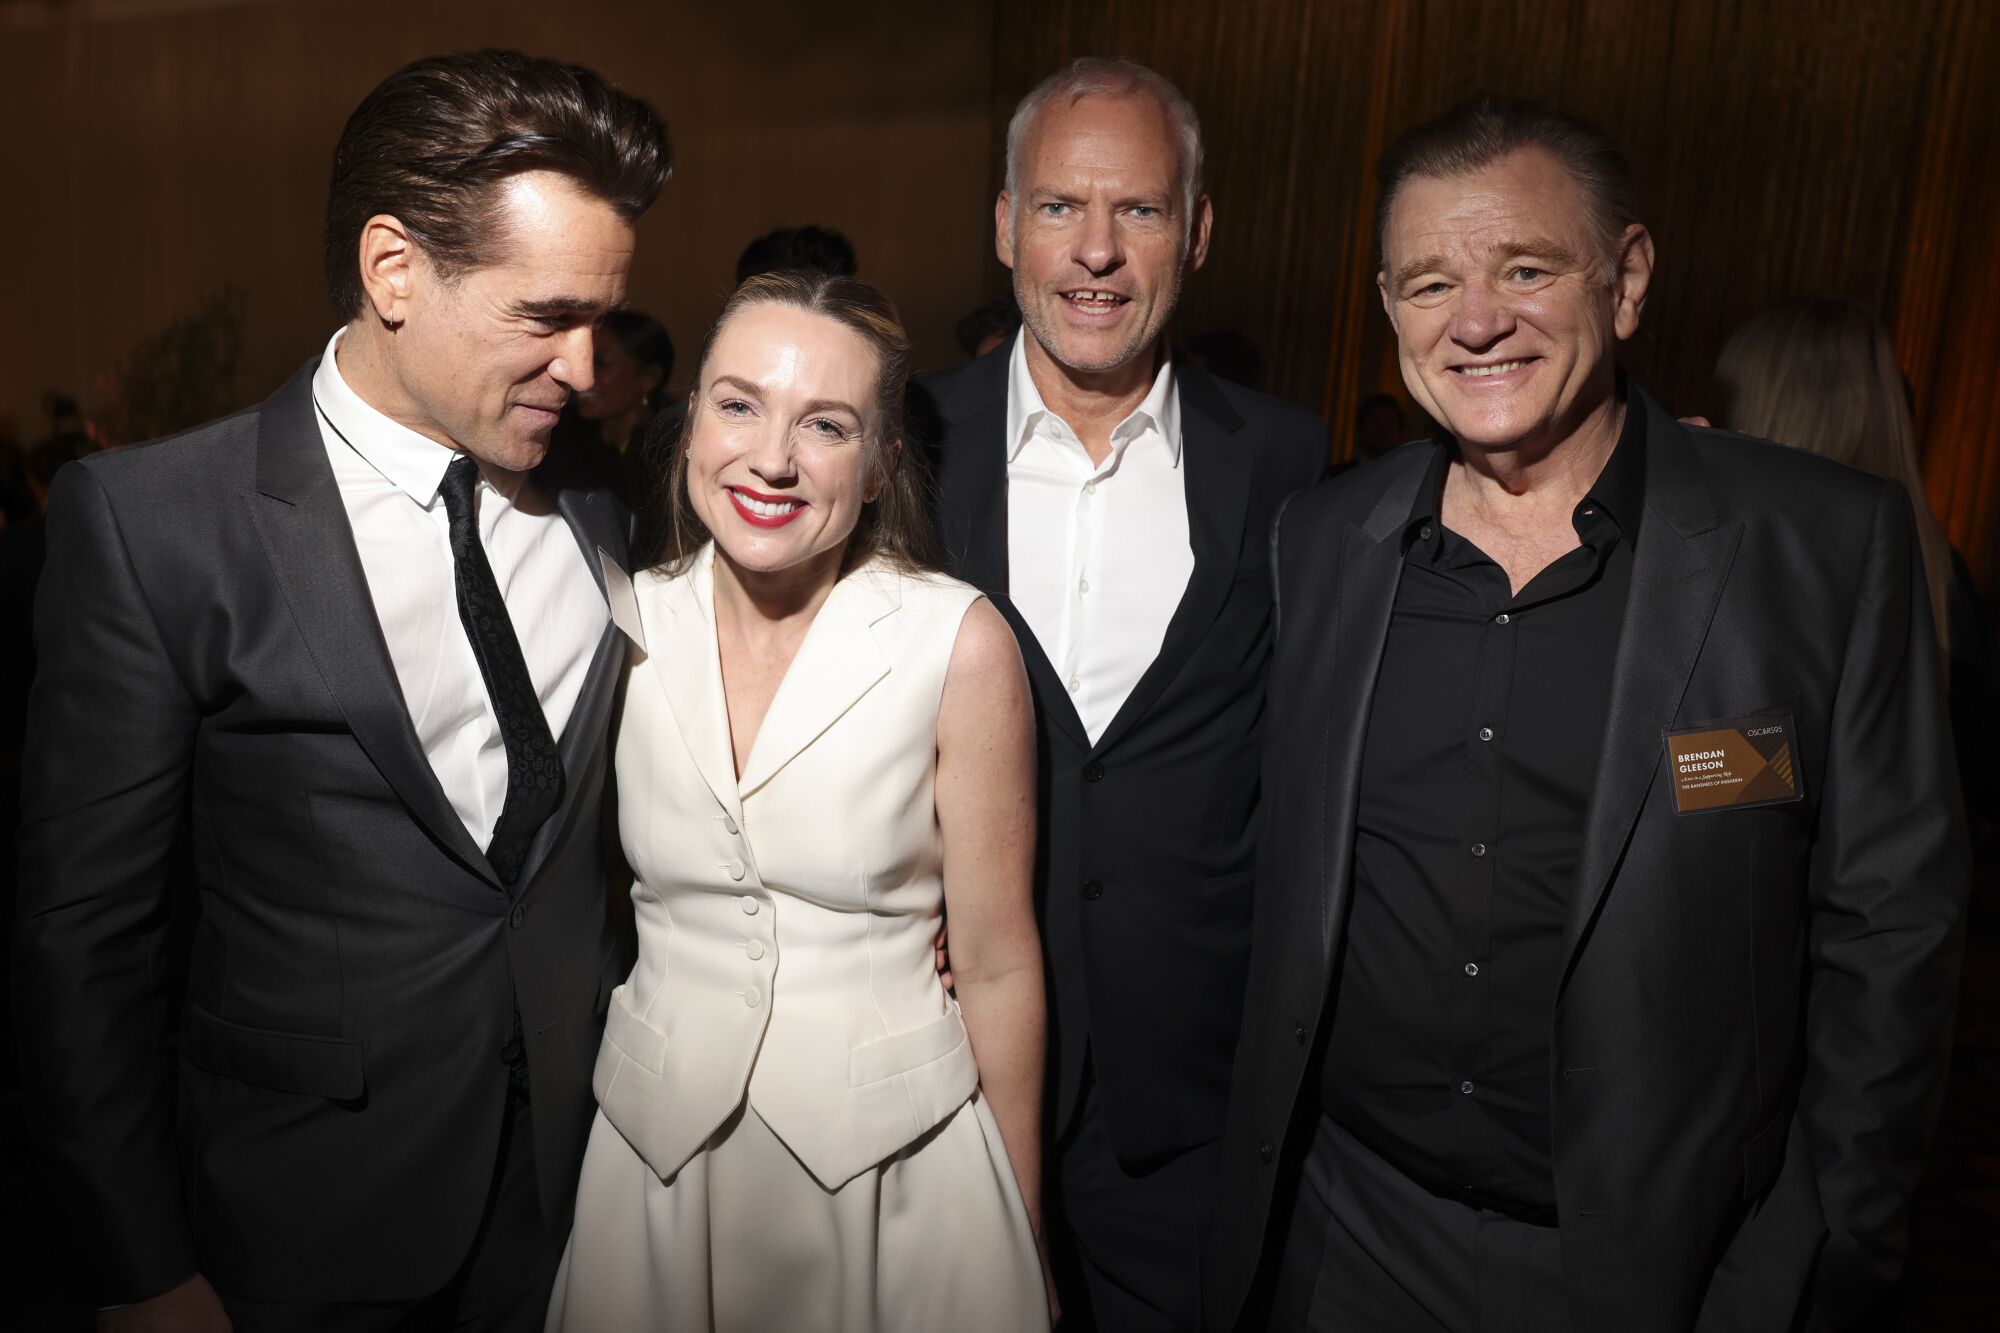 Three men in dark suits and a woman in a white sleeveless top. 